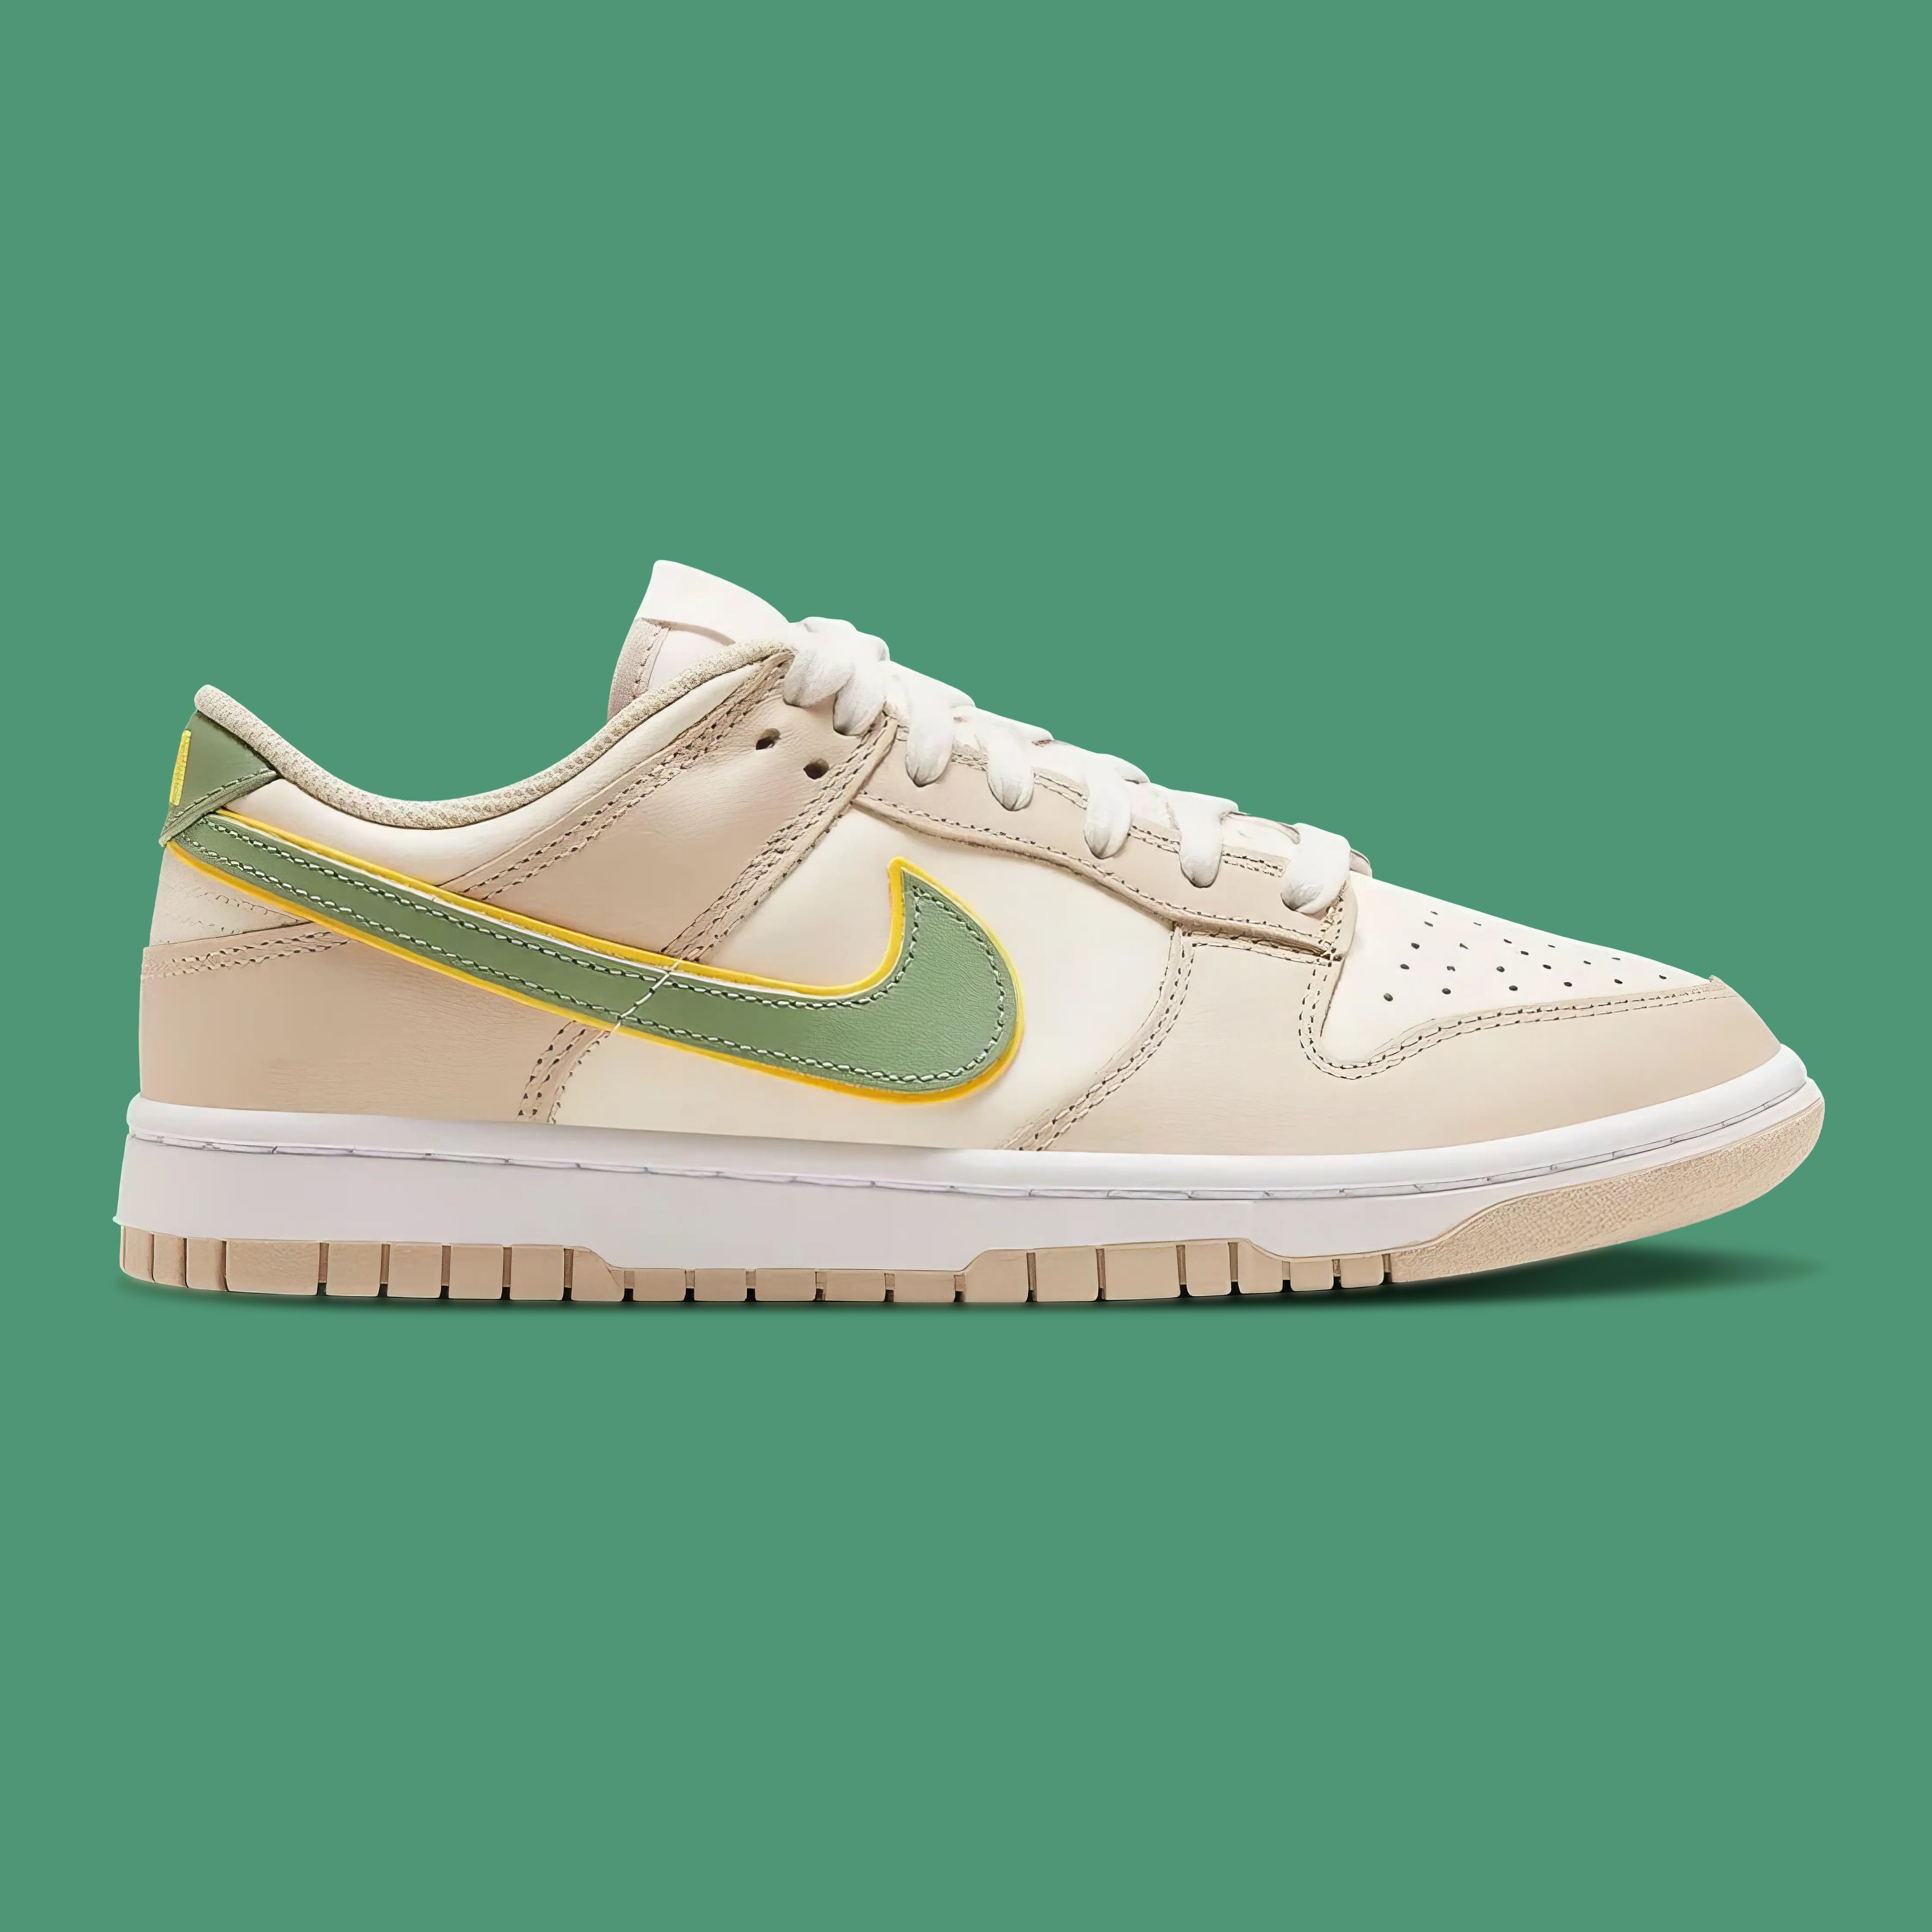 SB Dunk Low Pale Ivory Oil Green